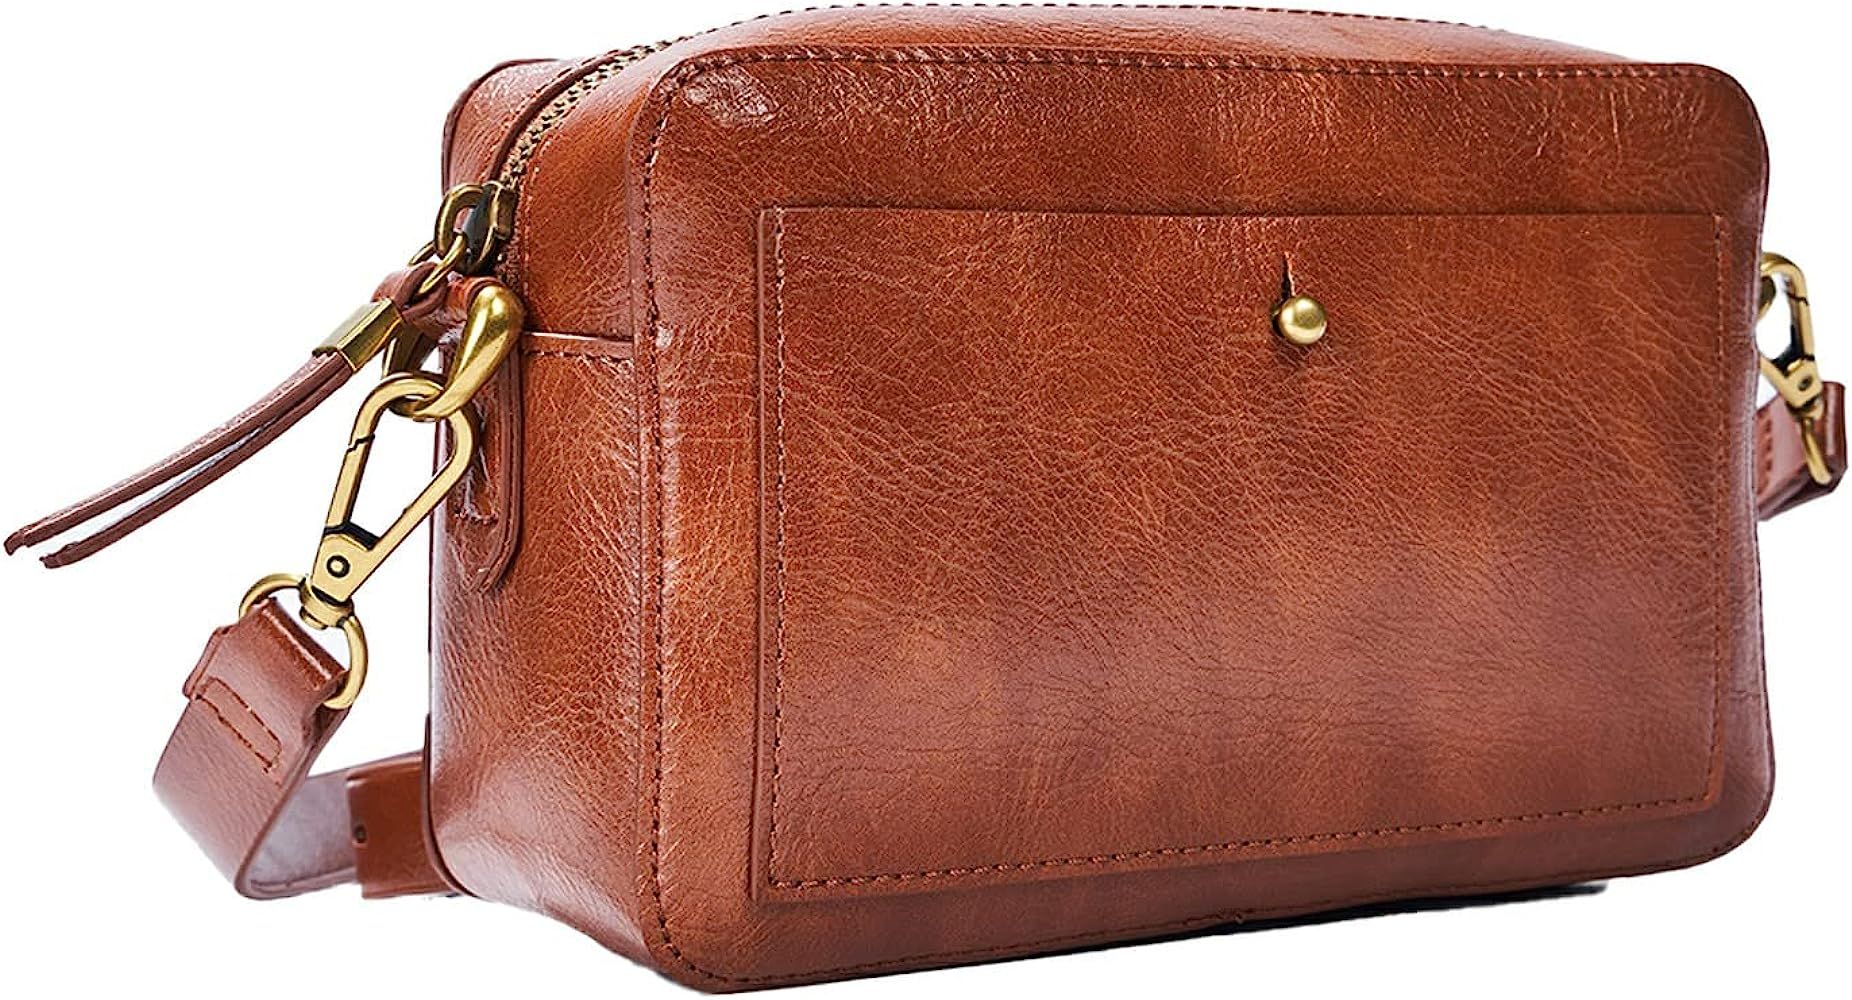 Leather Wristlet Clutch Wallet Purses Small Crossbody Bags for Women The Transport Camera Bag | Amazon (US)